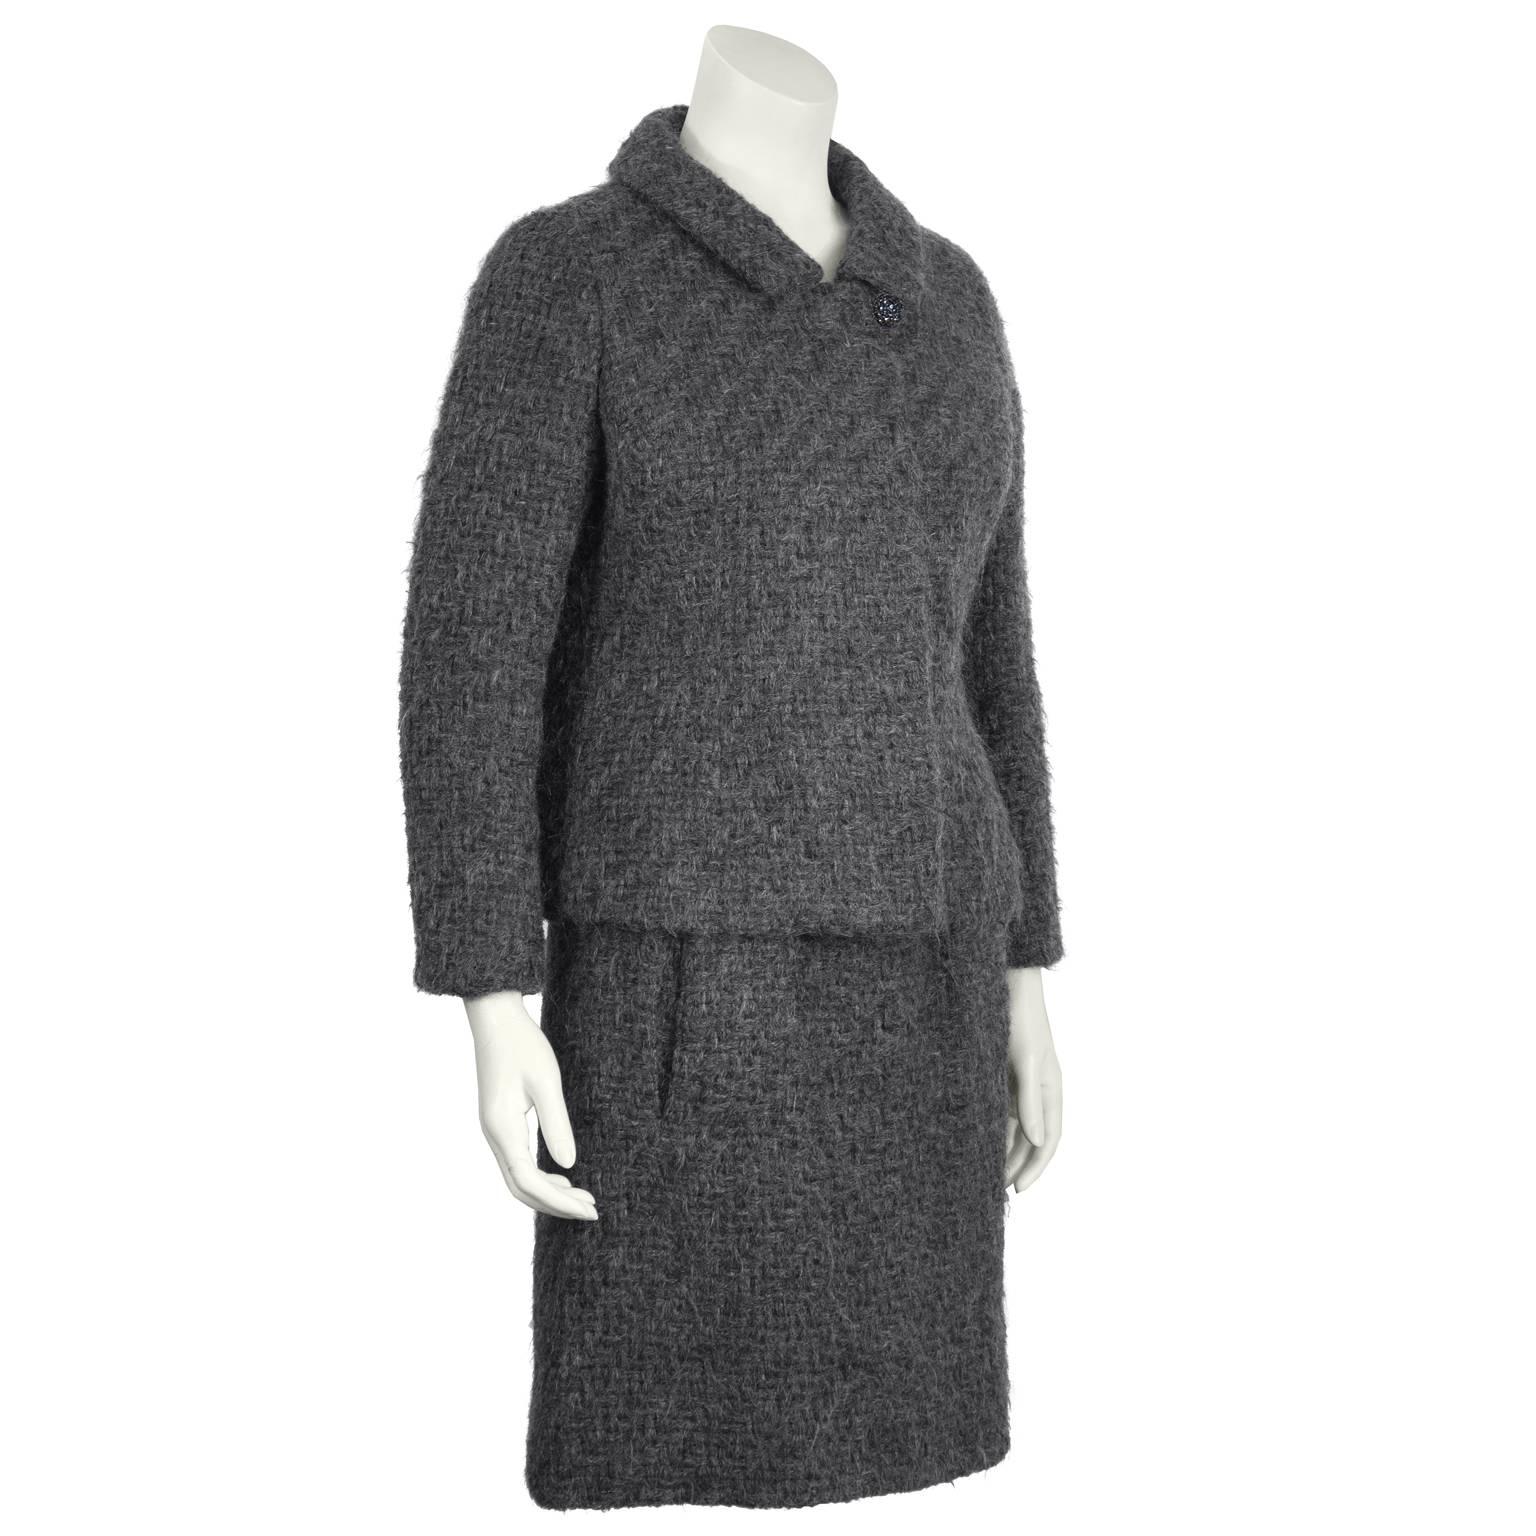 1960's Christian Dior exclusive design for Holt Renfrew Canada charcoal grey woven wool skirt suit. Box shape jacket has a pointed flat collar, with beaded grey button at the neck, and placket closure with hidden buttons. Skirt has a banded